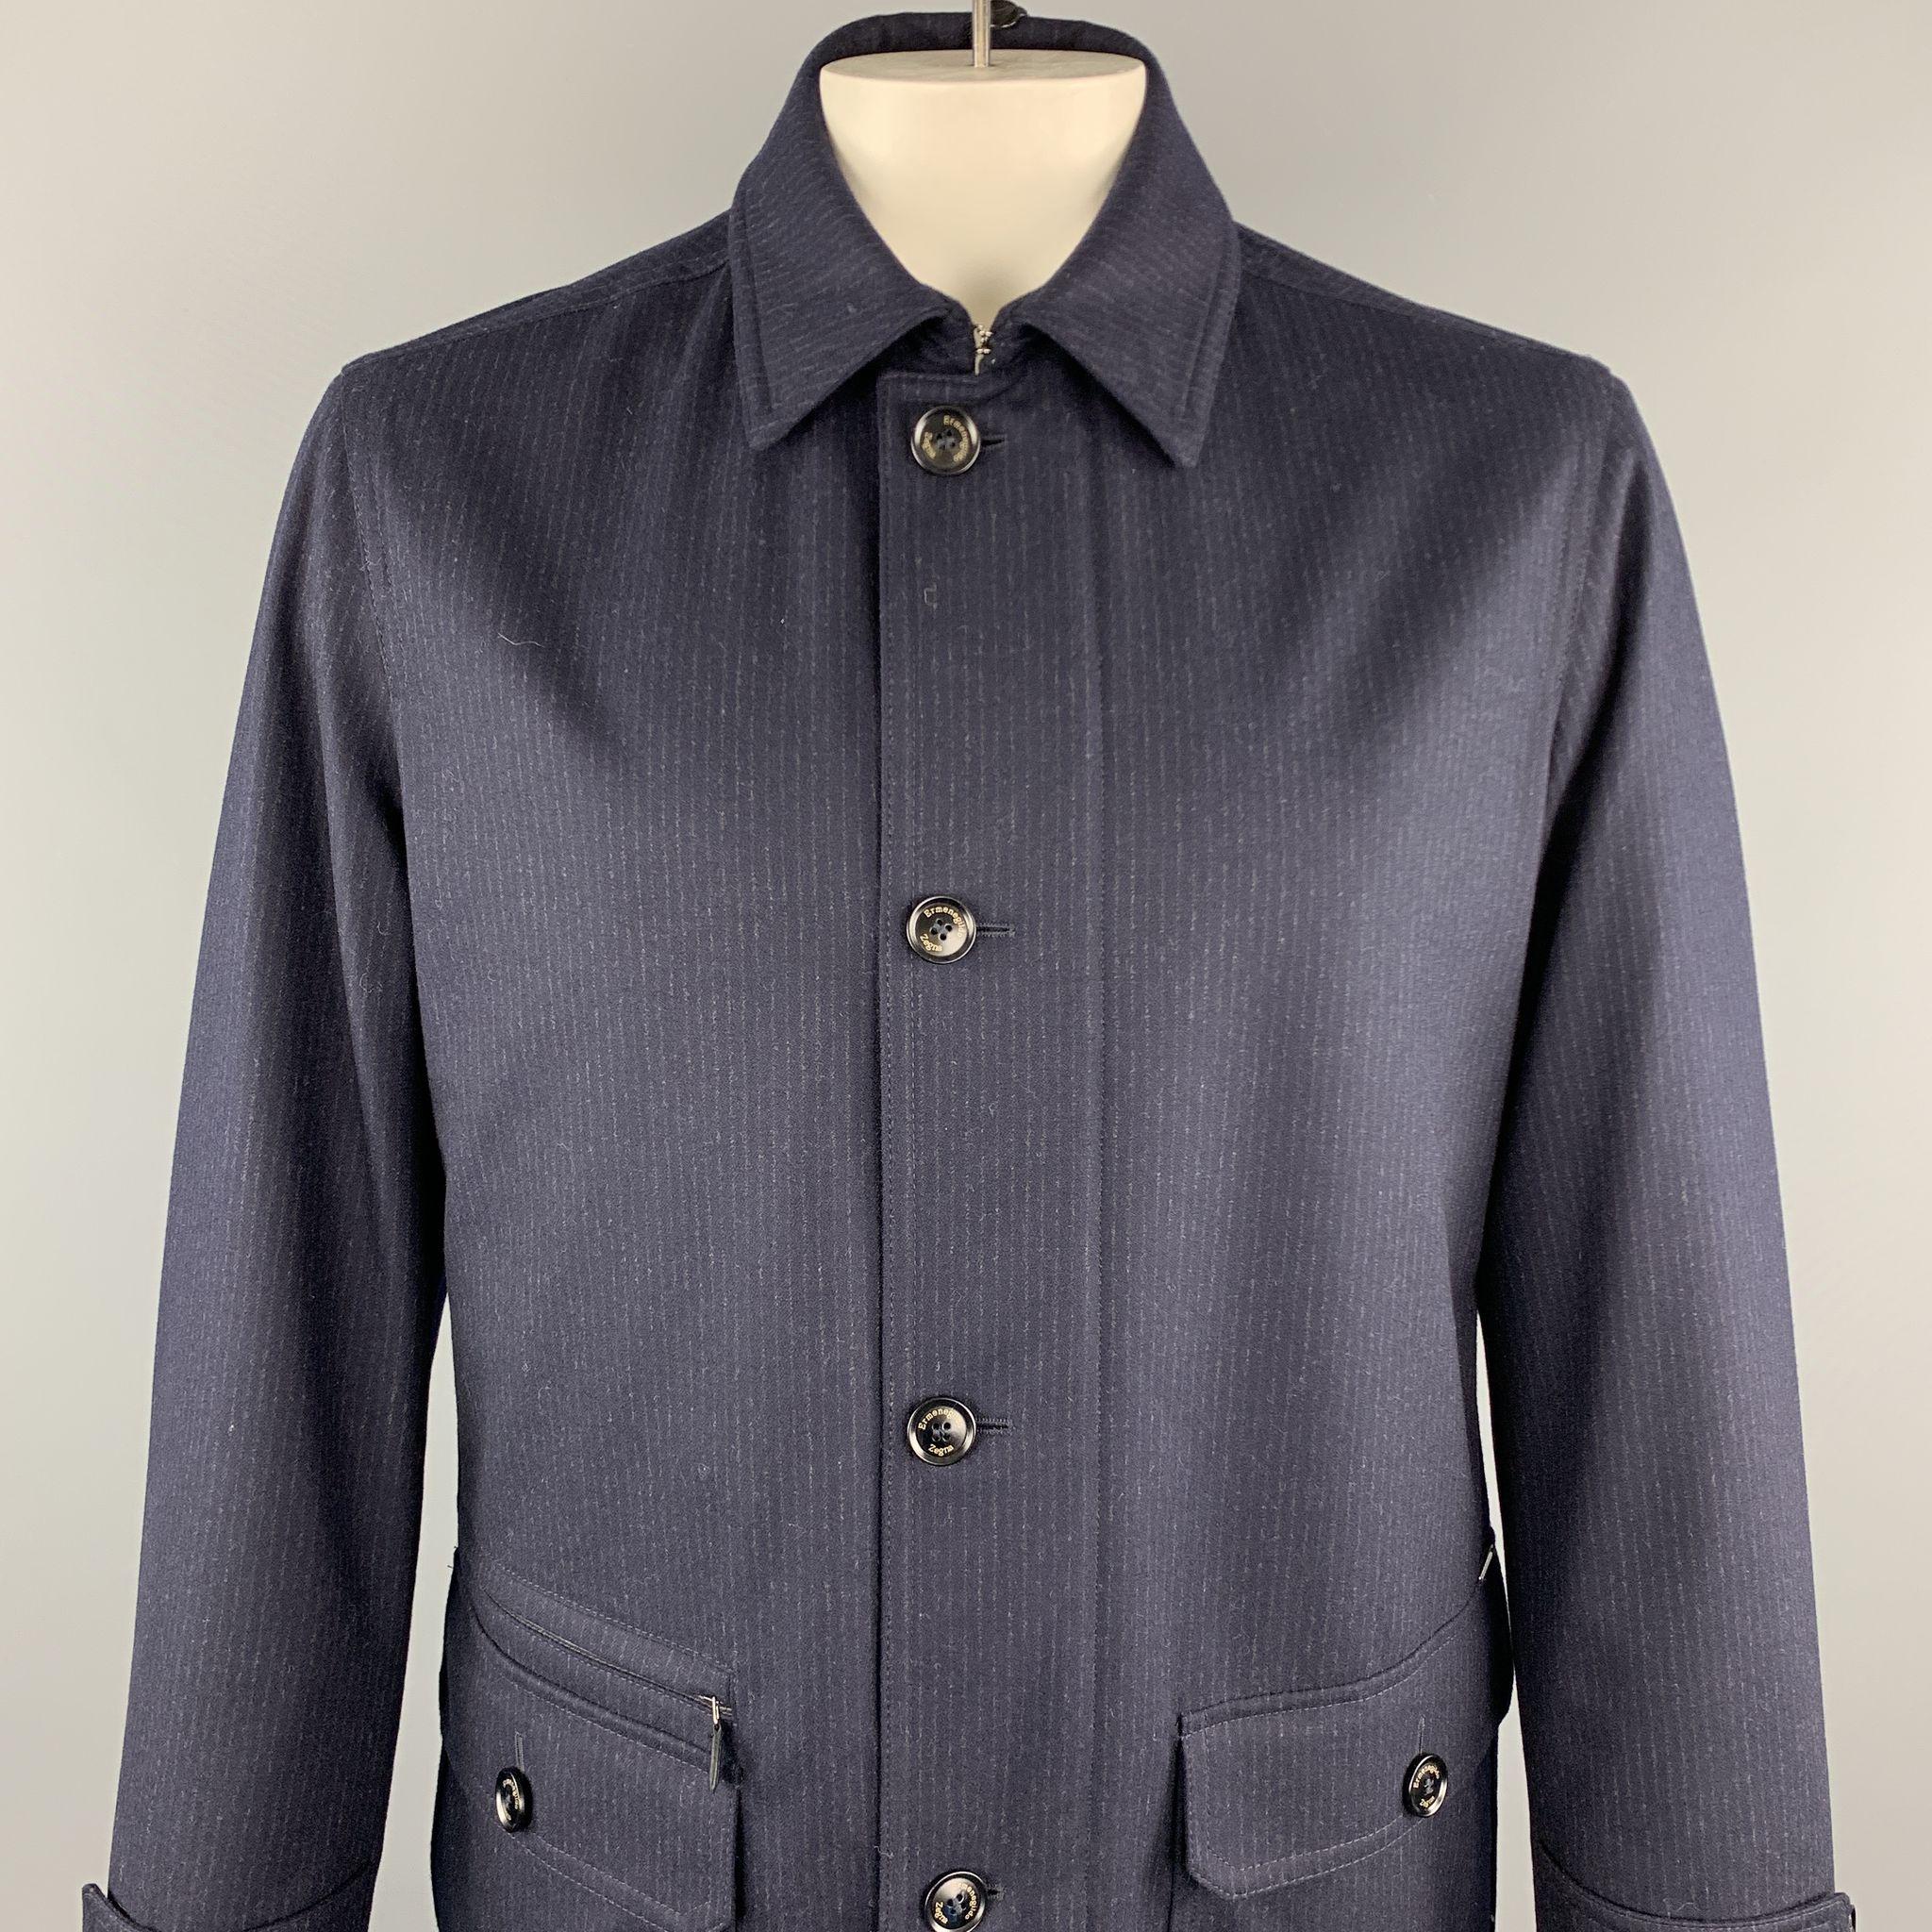 Retail Price - $2,300.00

ERMENEGILDO ZEGNA Coat comes in navy pinstripe wool featuring patch pockets, zipper pockets, and a zipper & buttoned closure. 

New With Tags.
Marked: 52

Measurements:

Shoulder: 17.5 in. 
Chest: 42 in. 
Sleeve: 24.5 in.